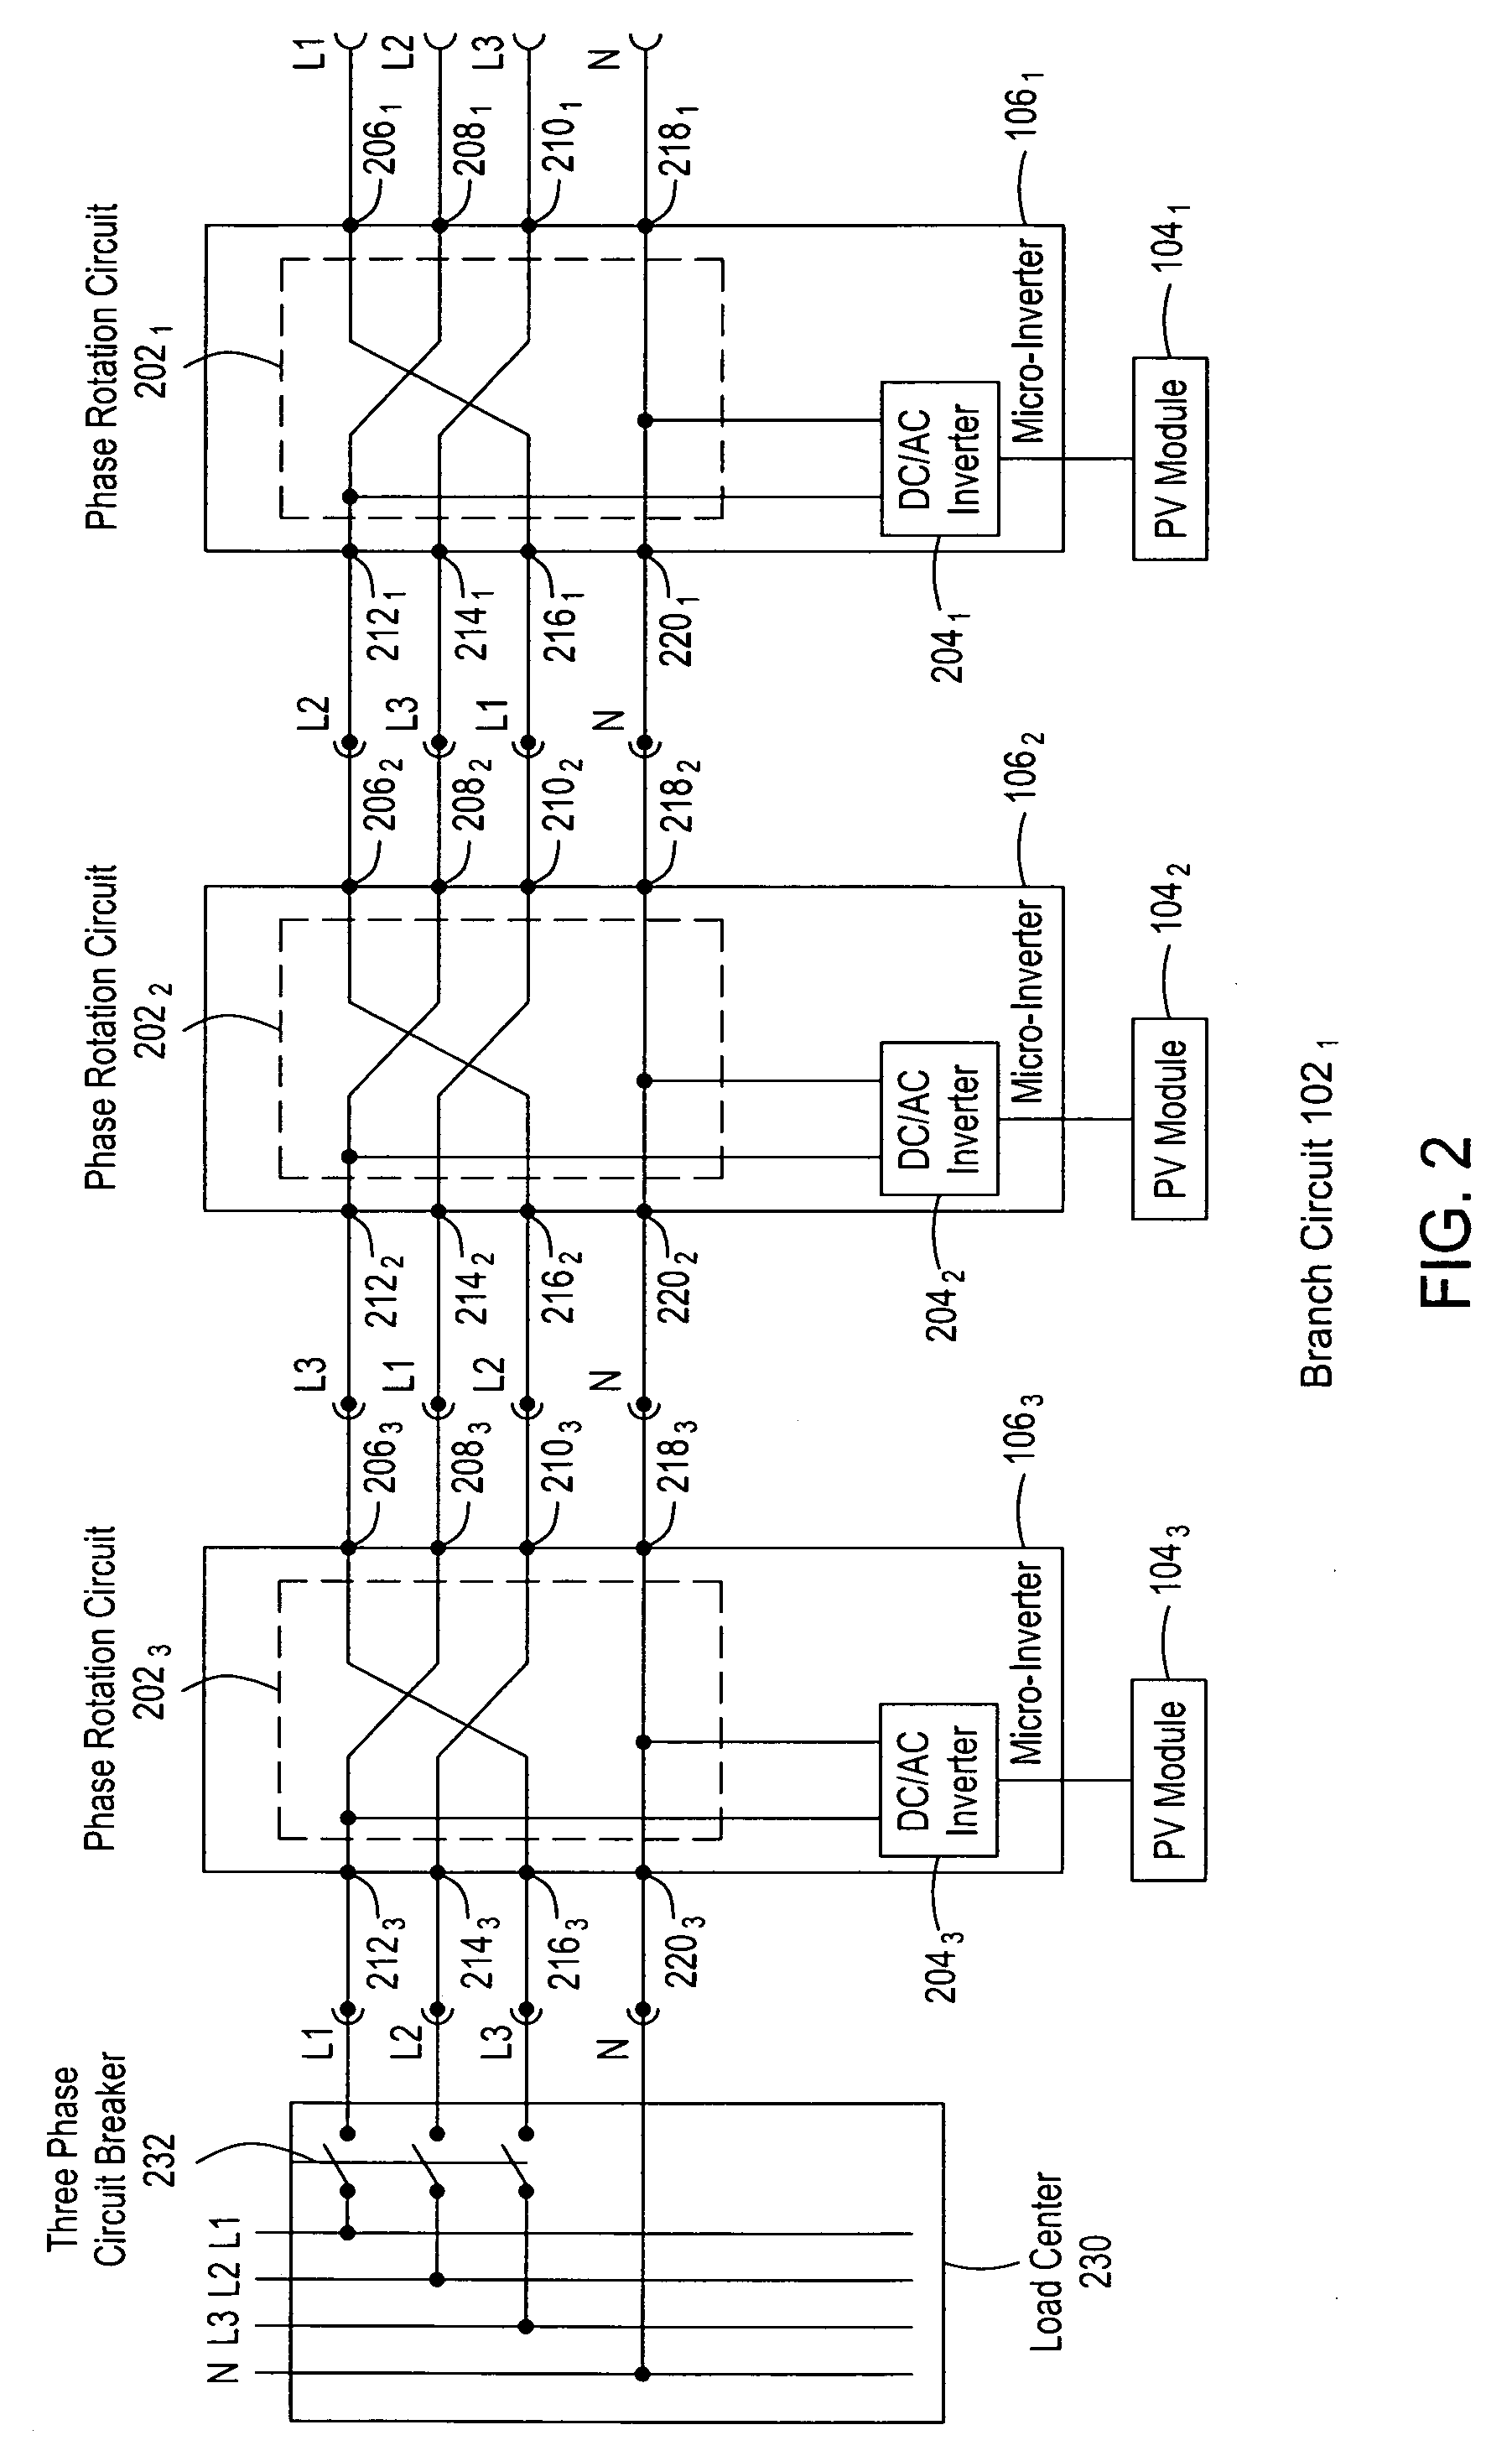 Apparatus for phase rotation for a three-phase AC circuit